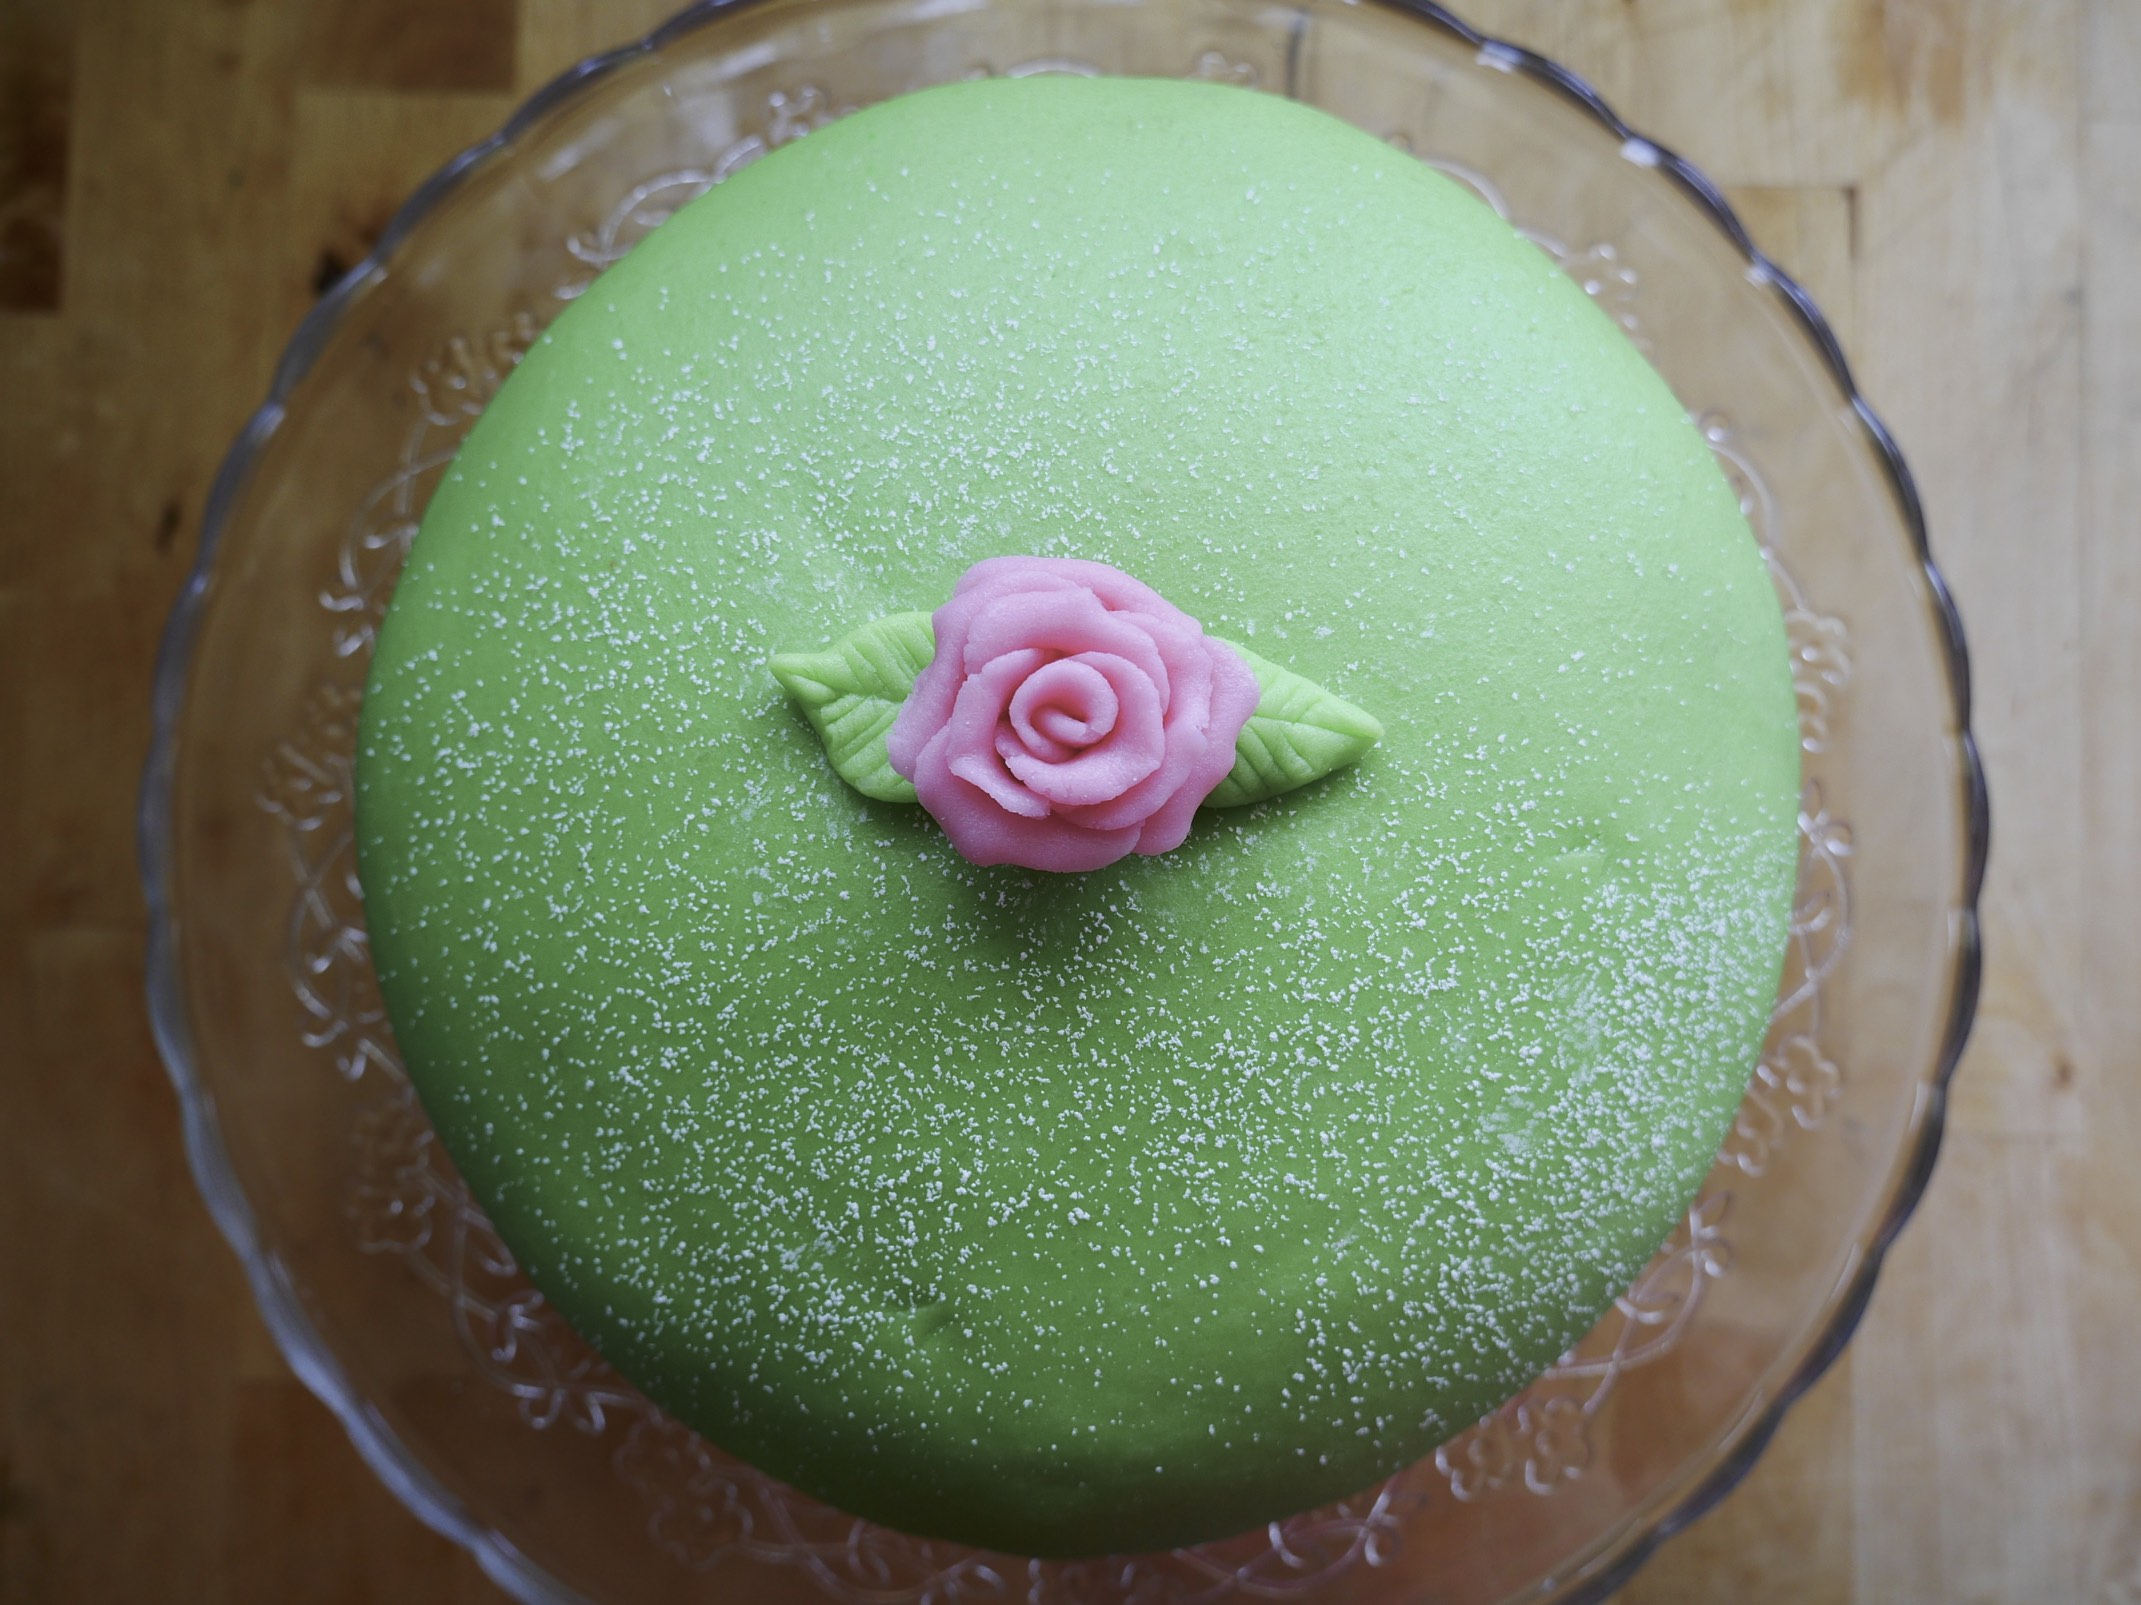 How to bake your own birthday cake - The Newbie Guide to Sweden